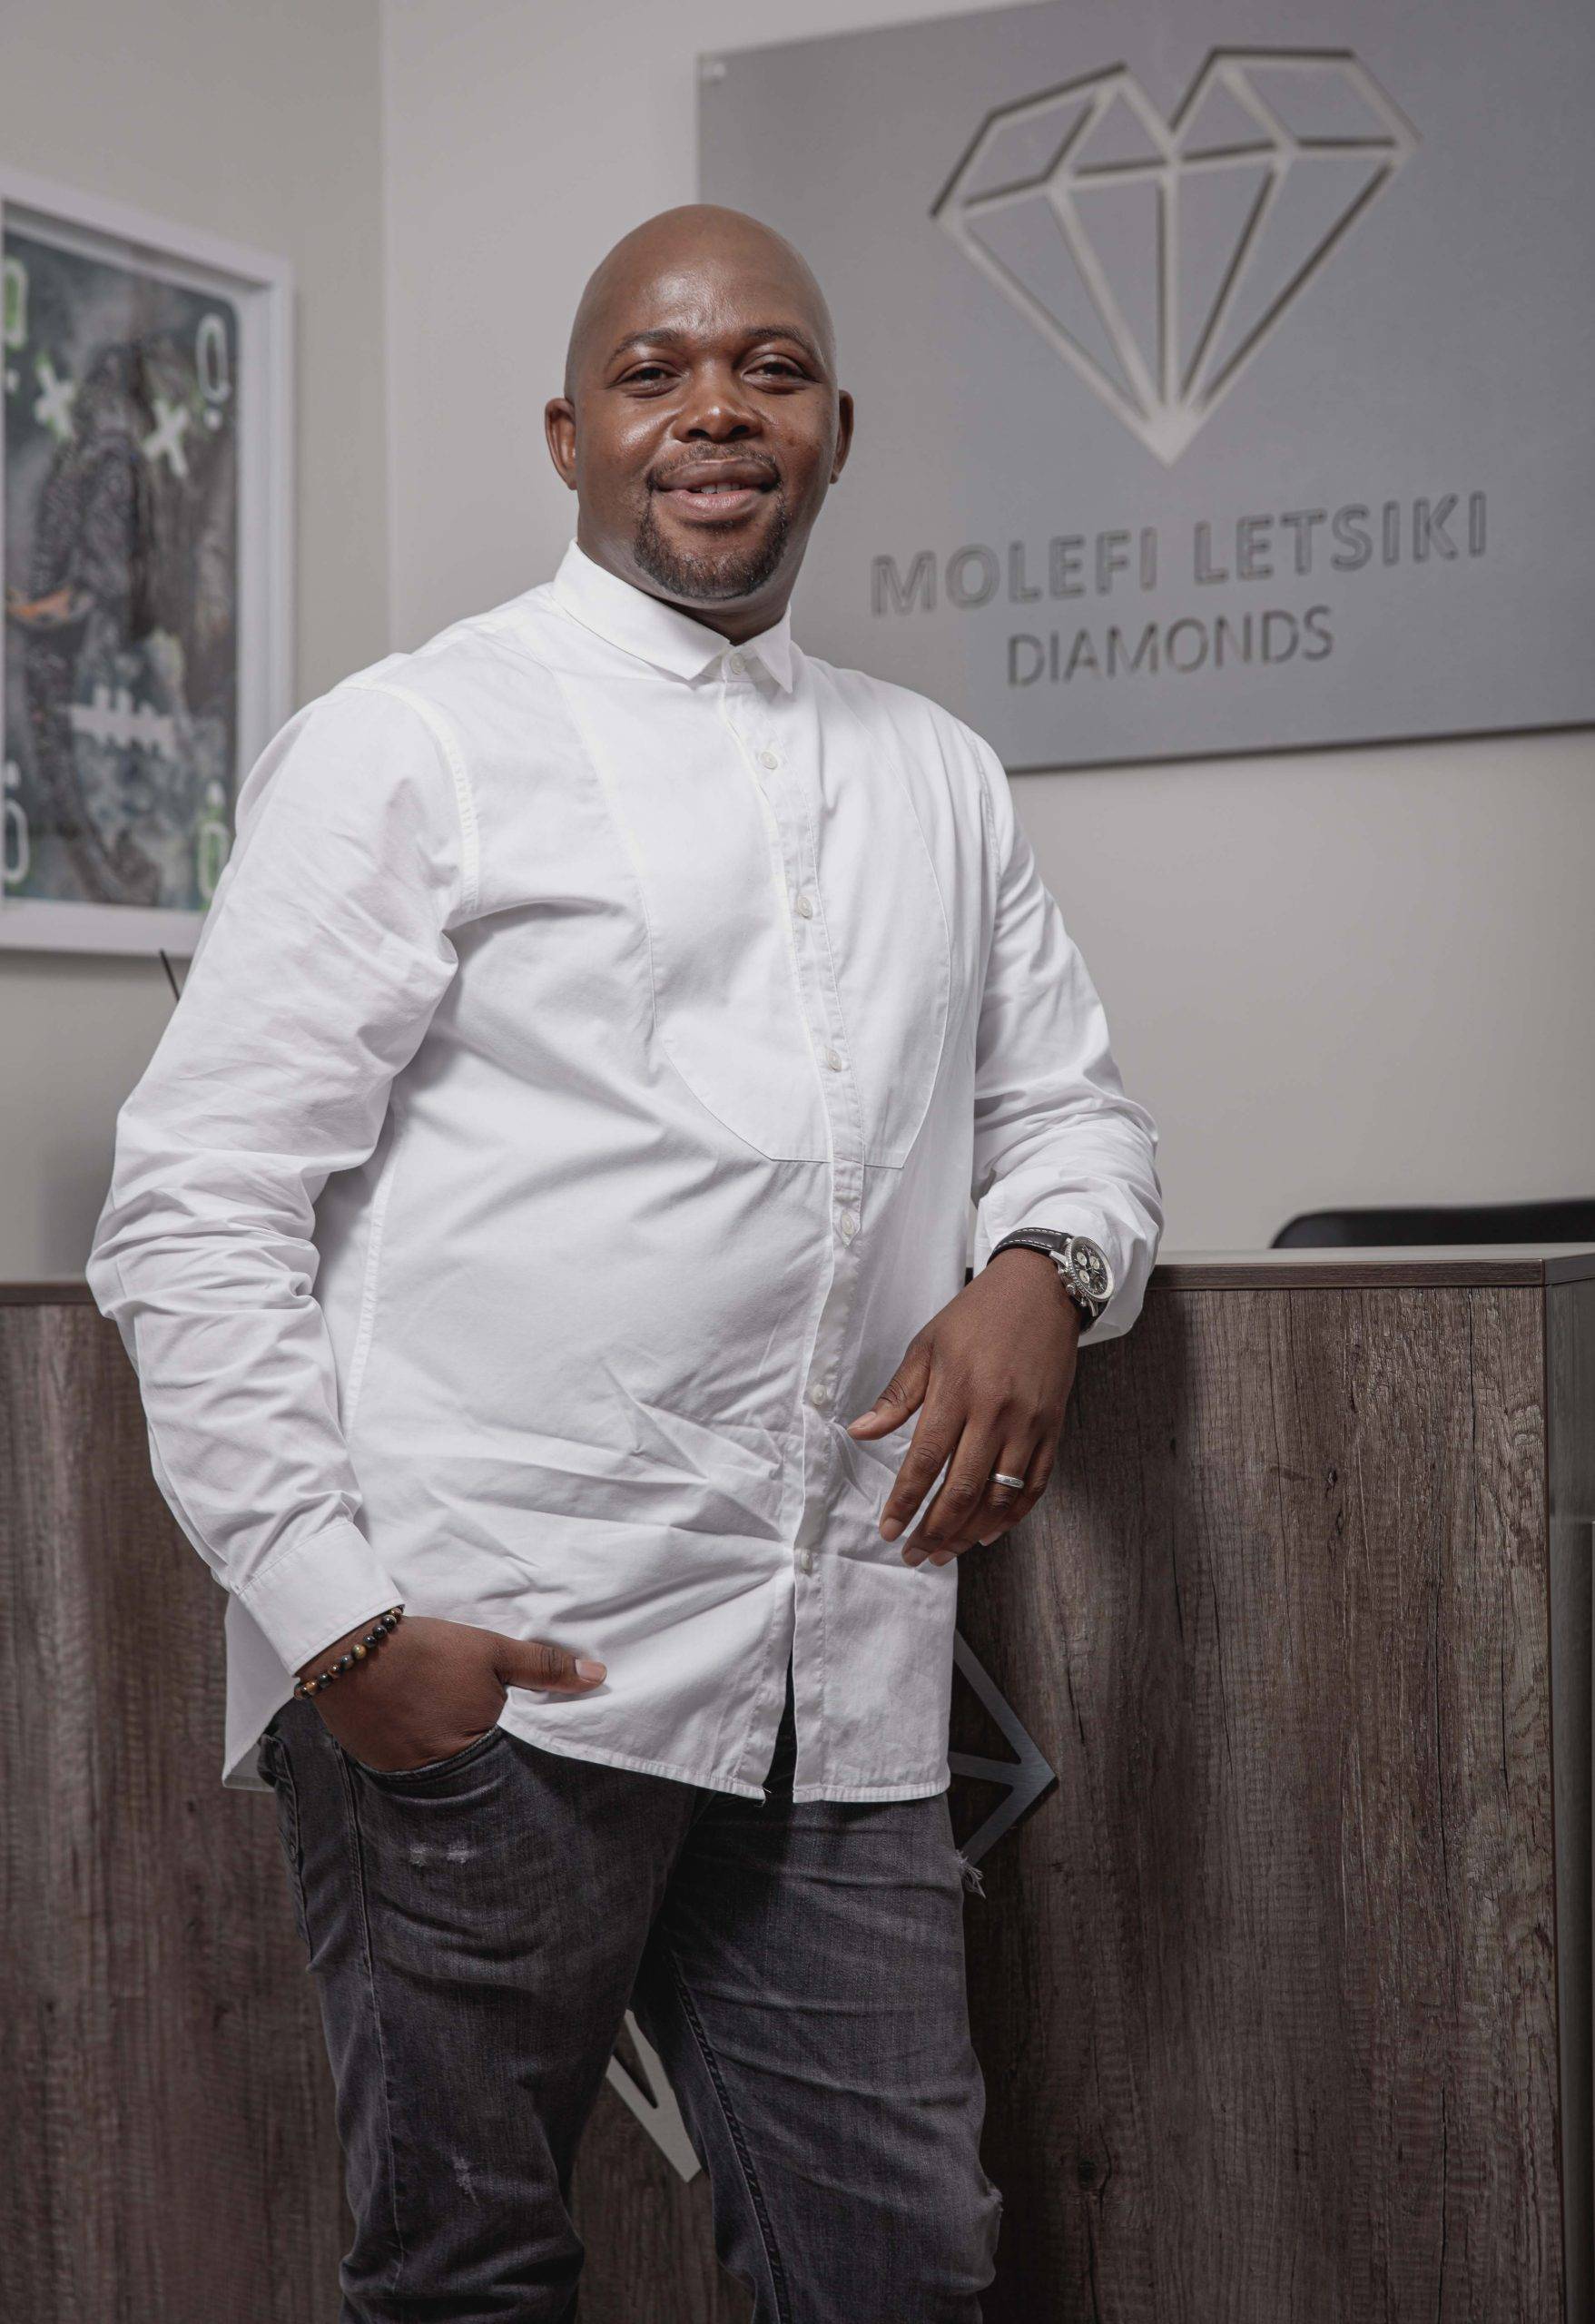 De Beers Announces That Molefi Letsiki Diamonds Will Become First Majority Black-Owned Sightholder